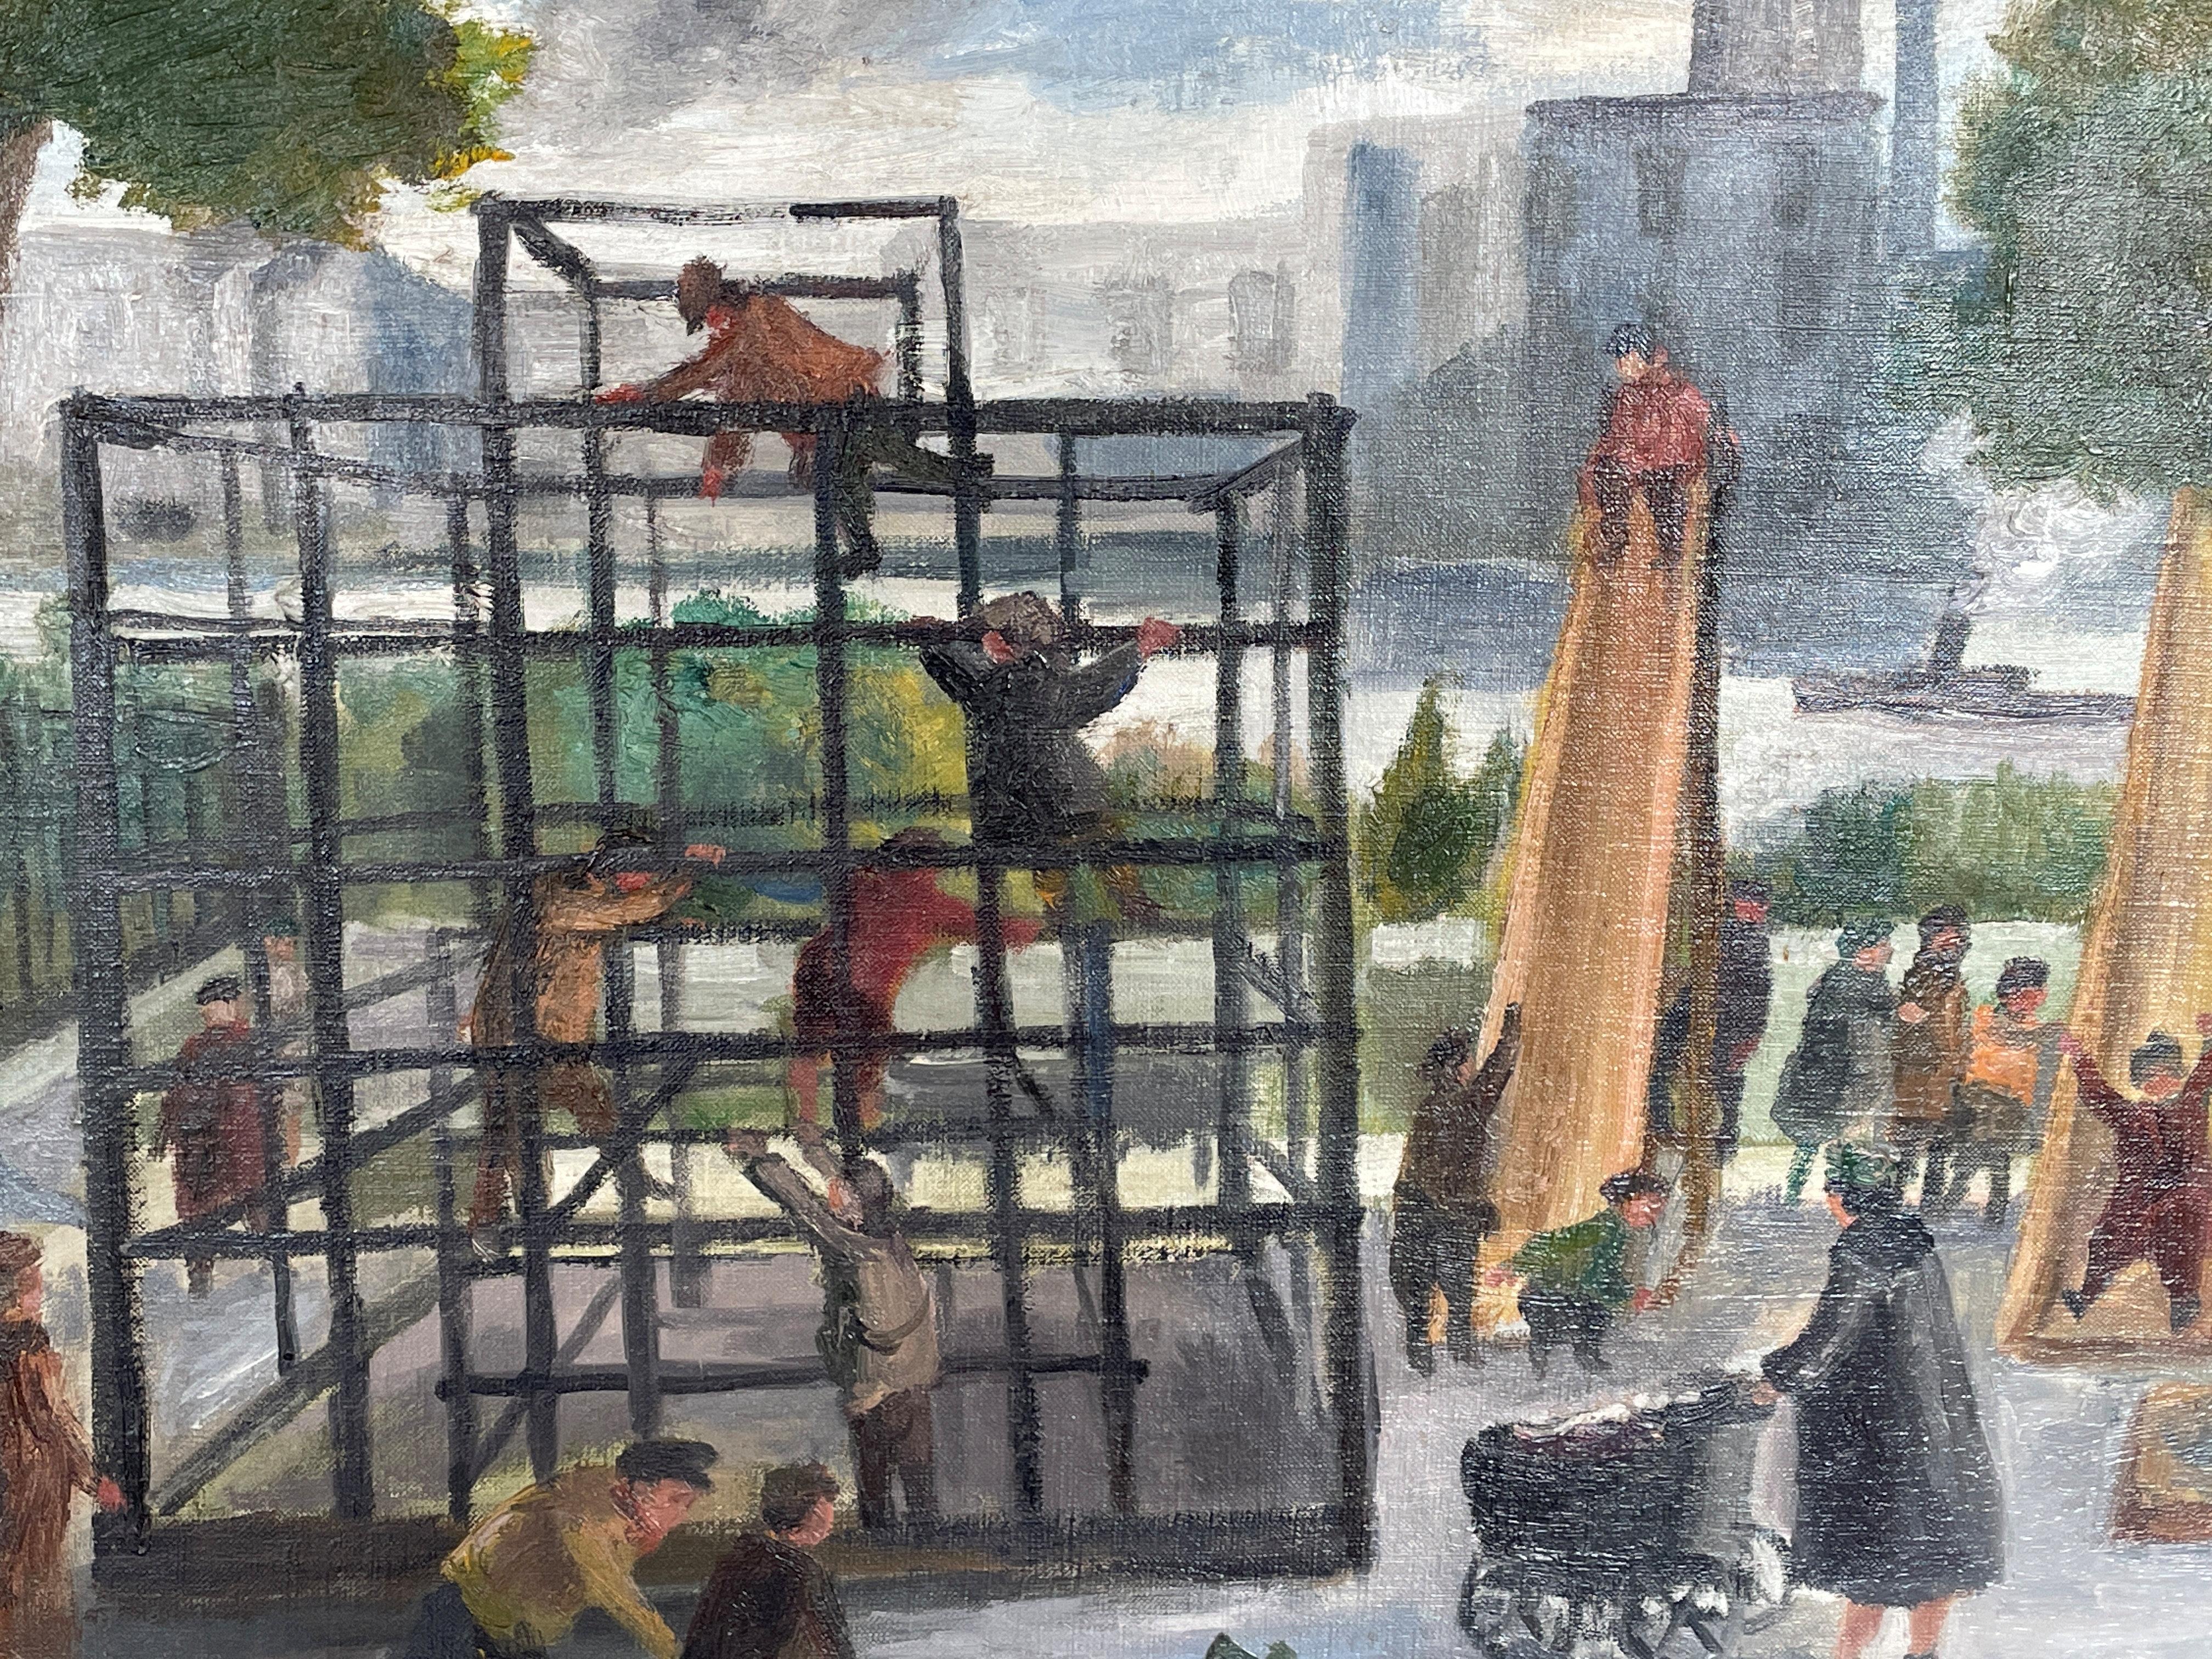 George Picken
Playground, Carl Schurz Park, 1938
Signed and dated lower left
Oil on canvas
28 x 36 inches

Provenance:
Estate of the artist

A native New Yorker, George Picken was born in 1898. His father, an artist and photographer, emigrated from